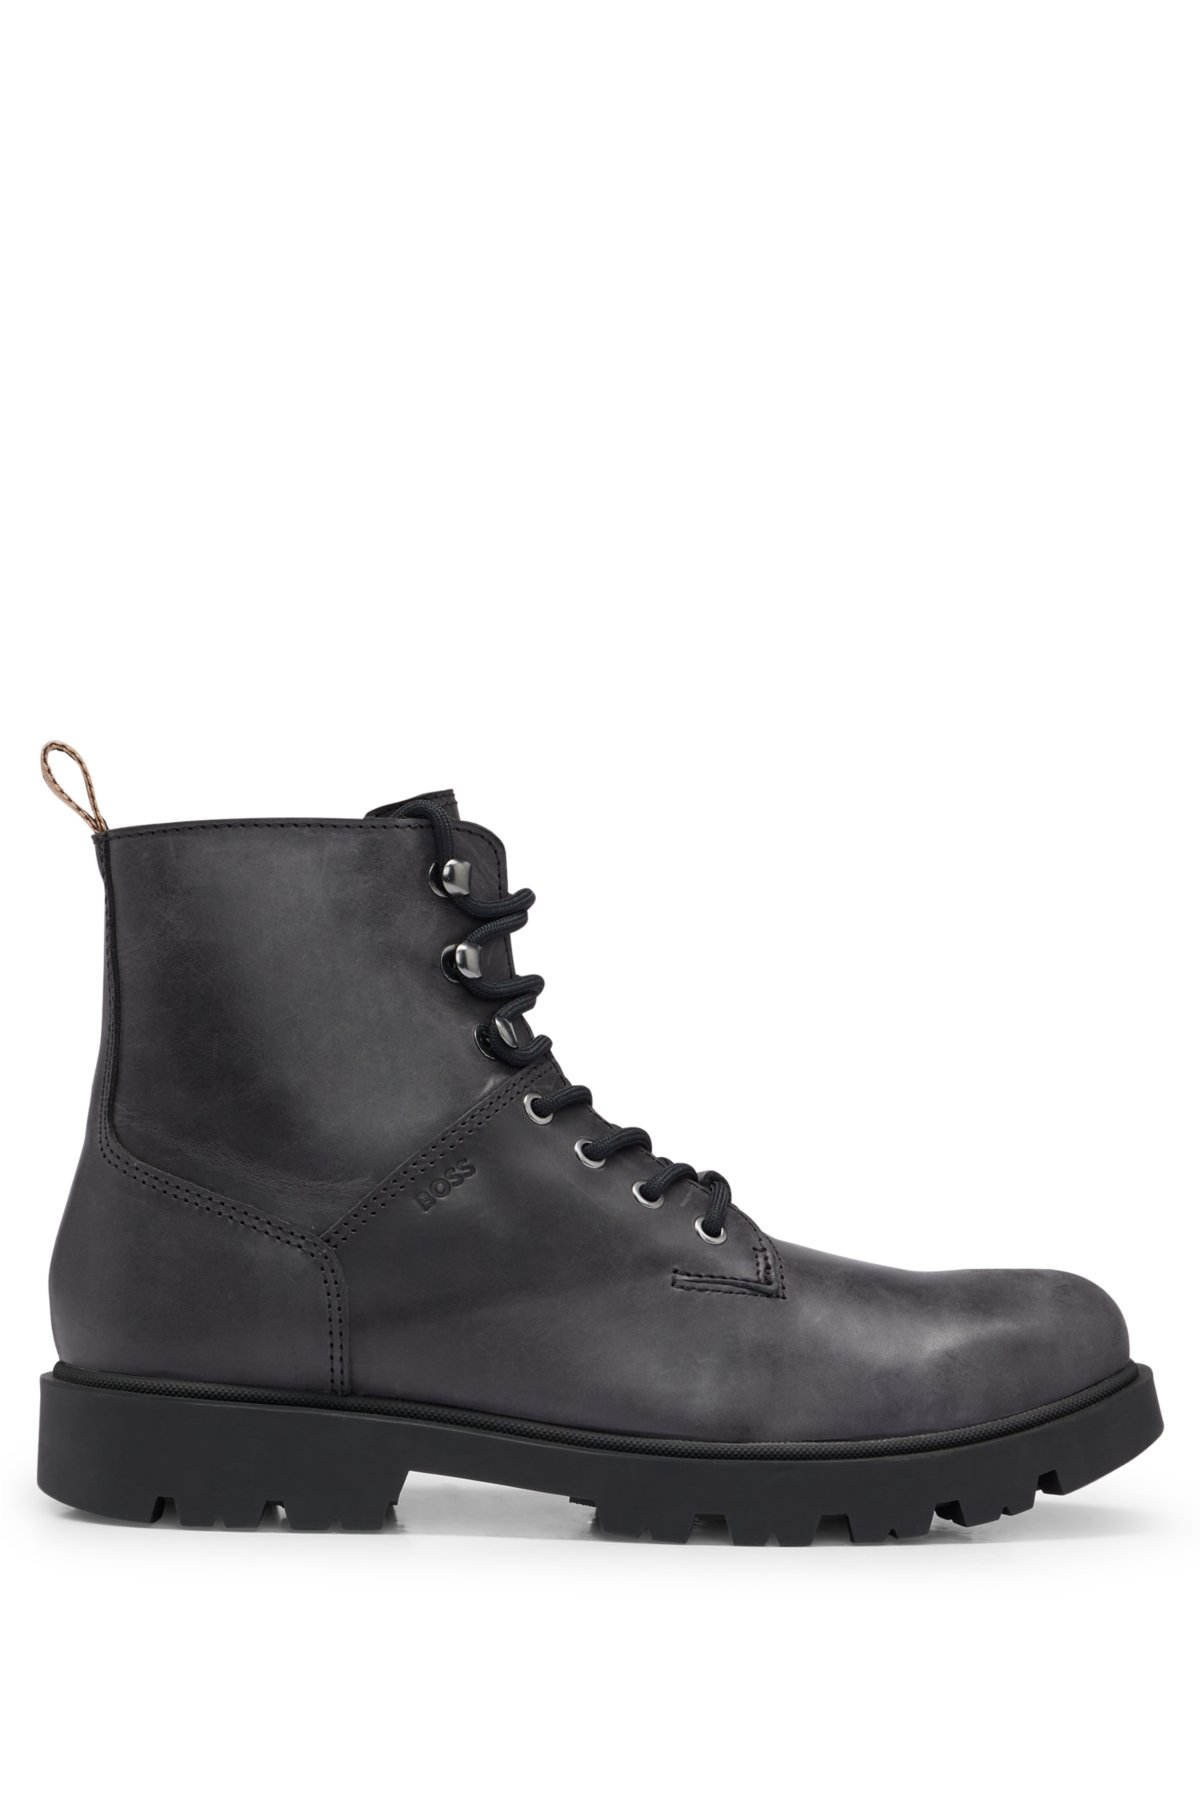 BOSS - Half boots in pull-up leather with embossed logo